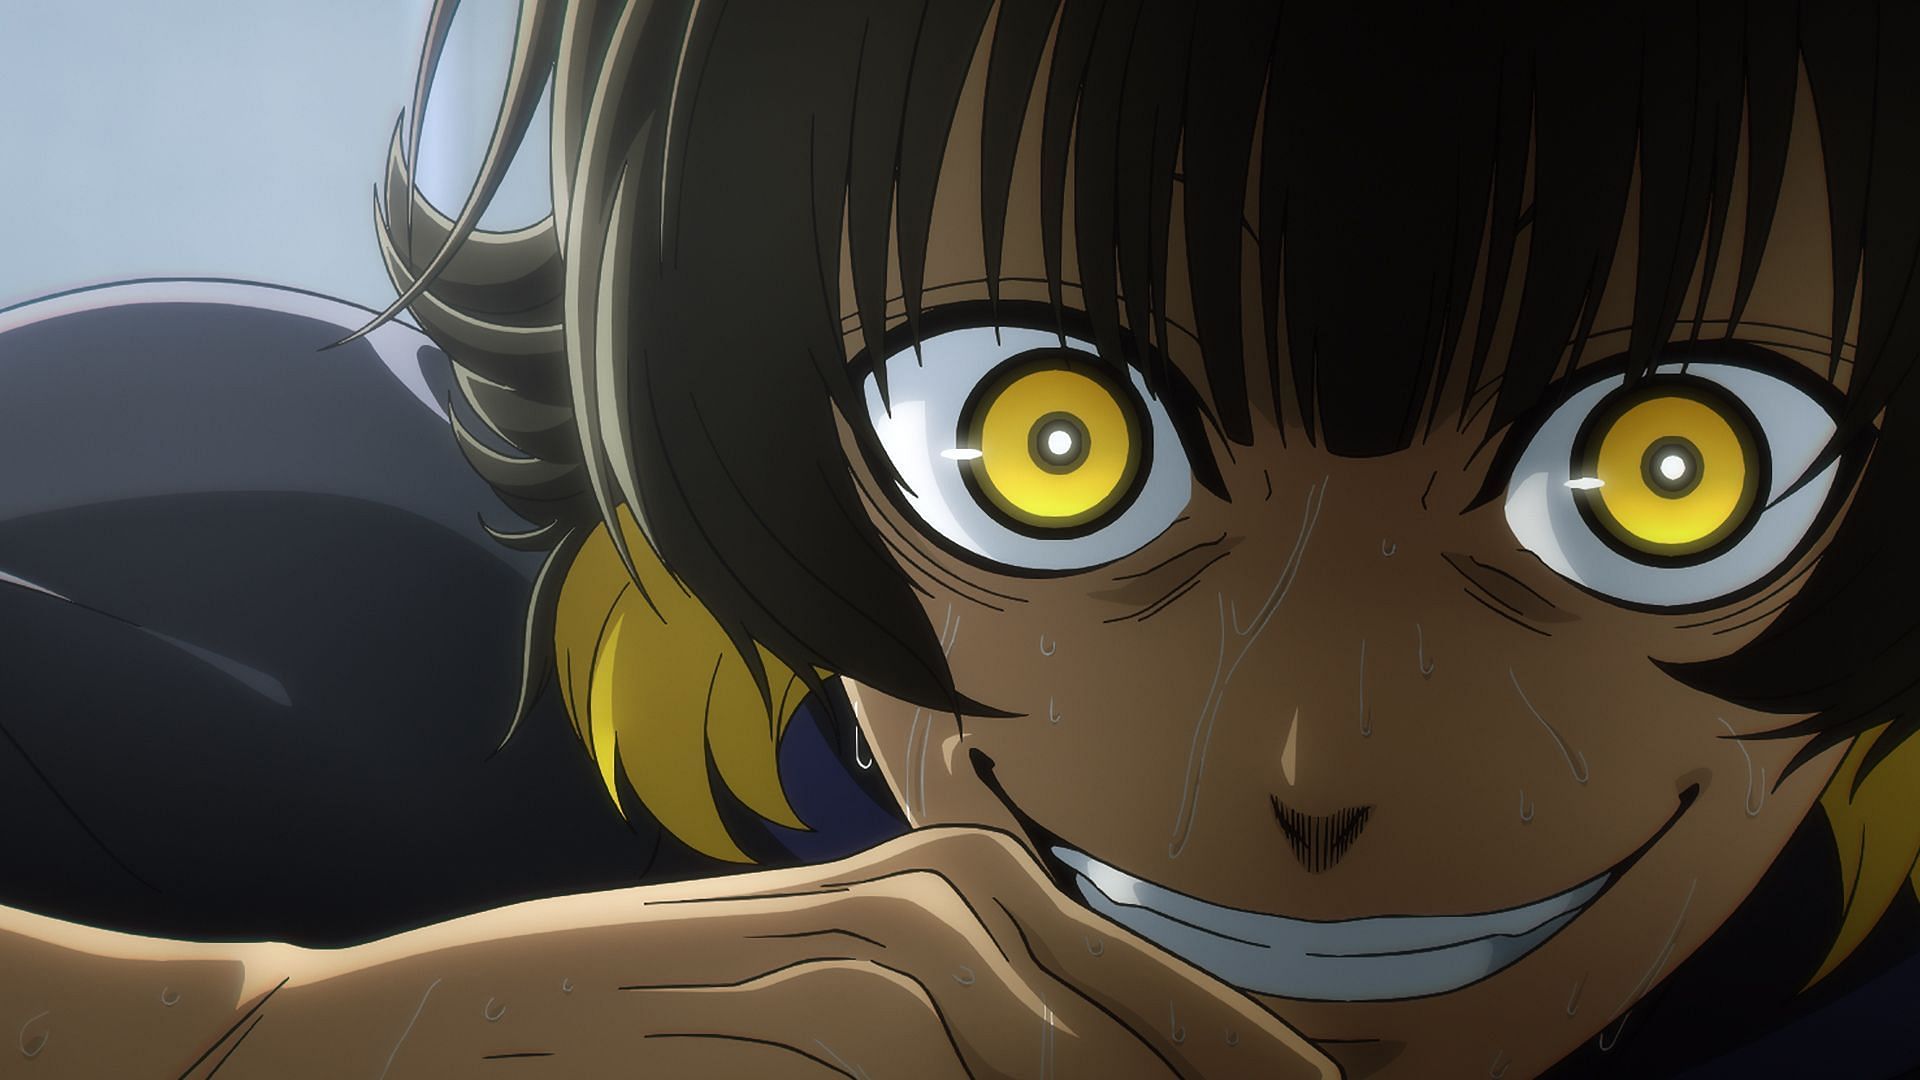 Blue Lock episode 19 preview hints at Bachira dealing with his monster